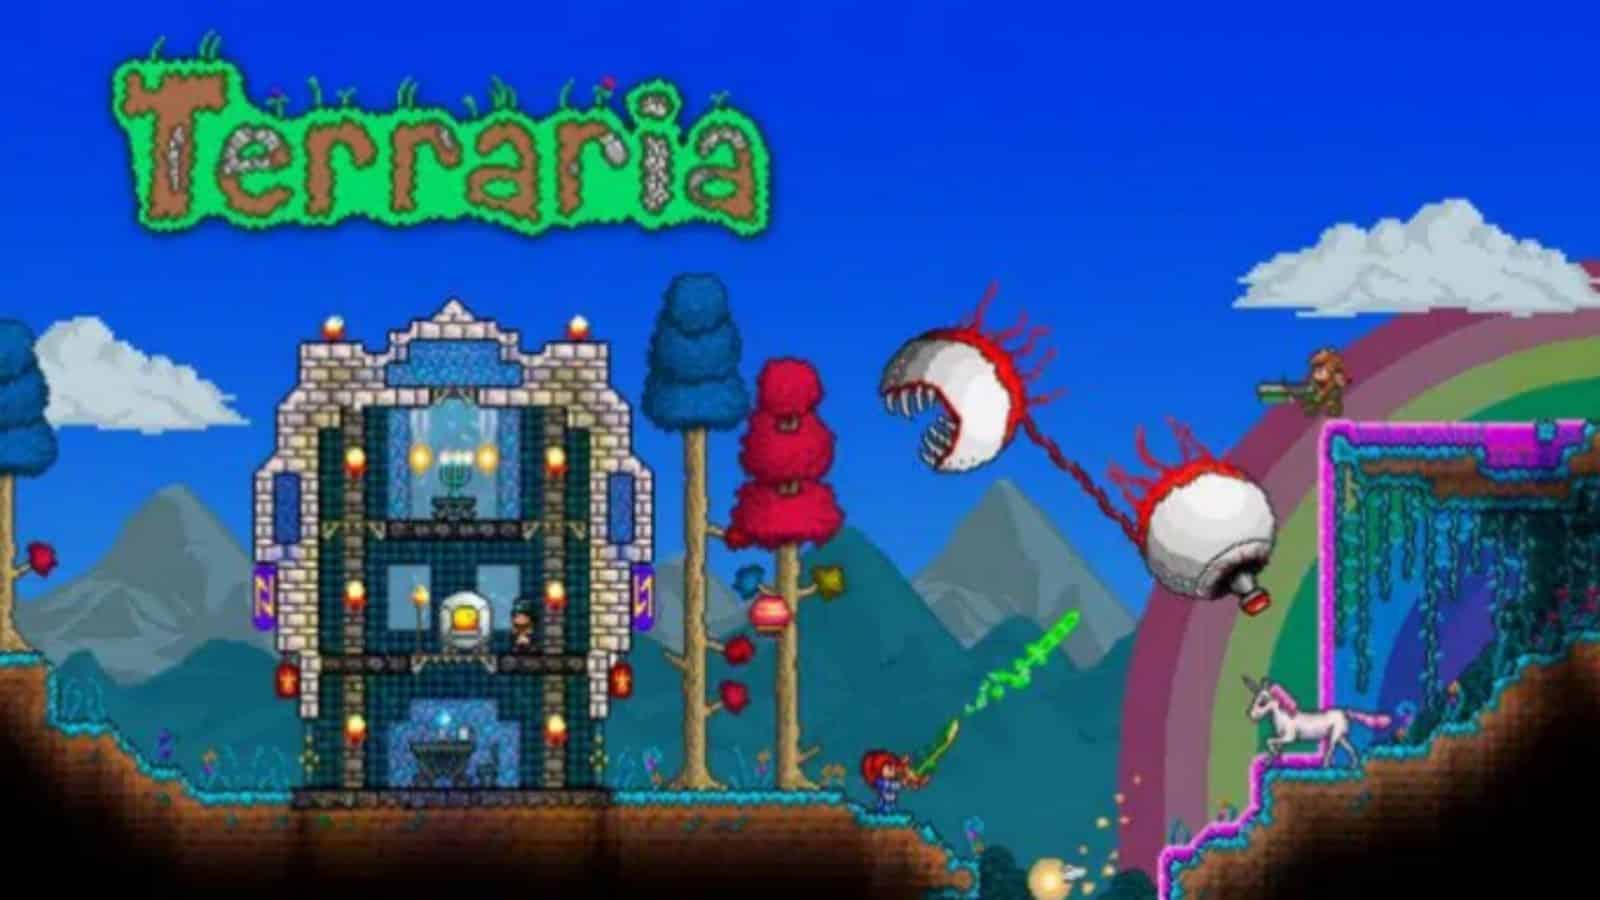 How to Setup Crossplay for PC and Mobile on a Terraria Server